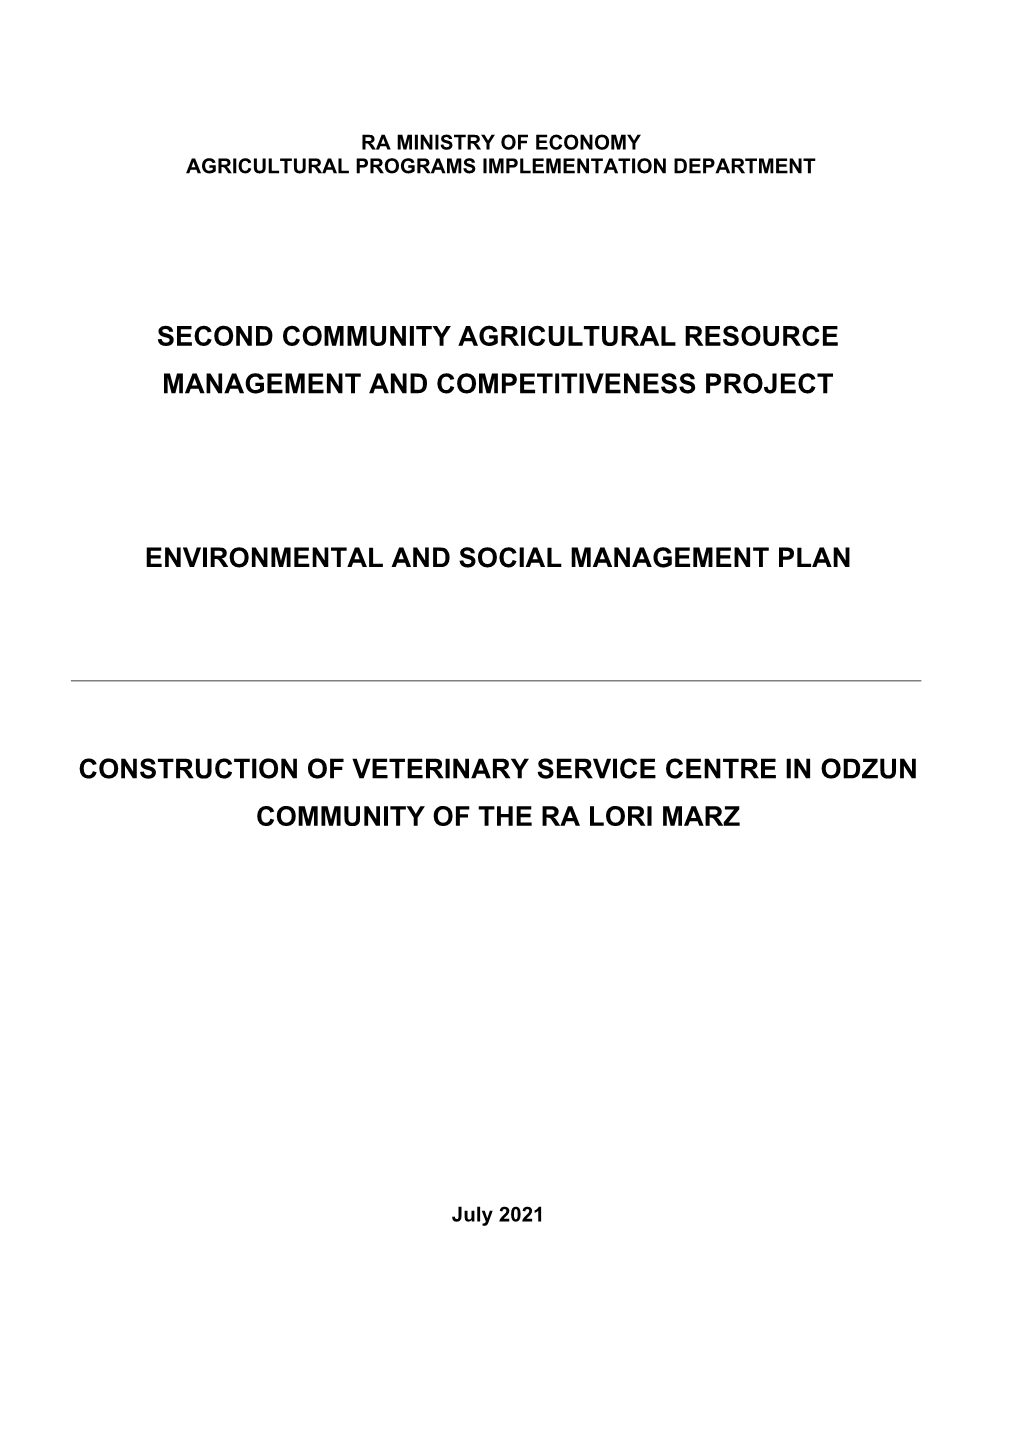 Second Community Agricultural Resource Management and Competitiveness Project